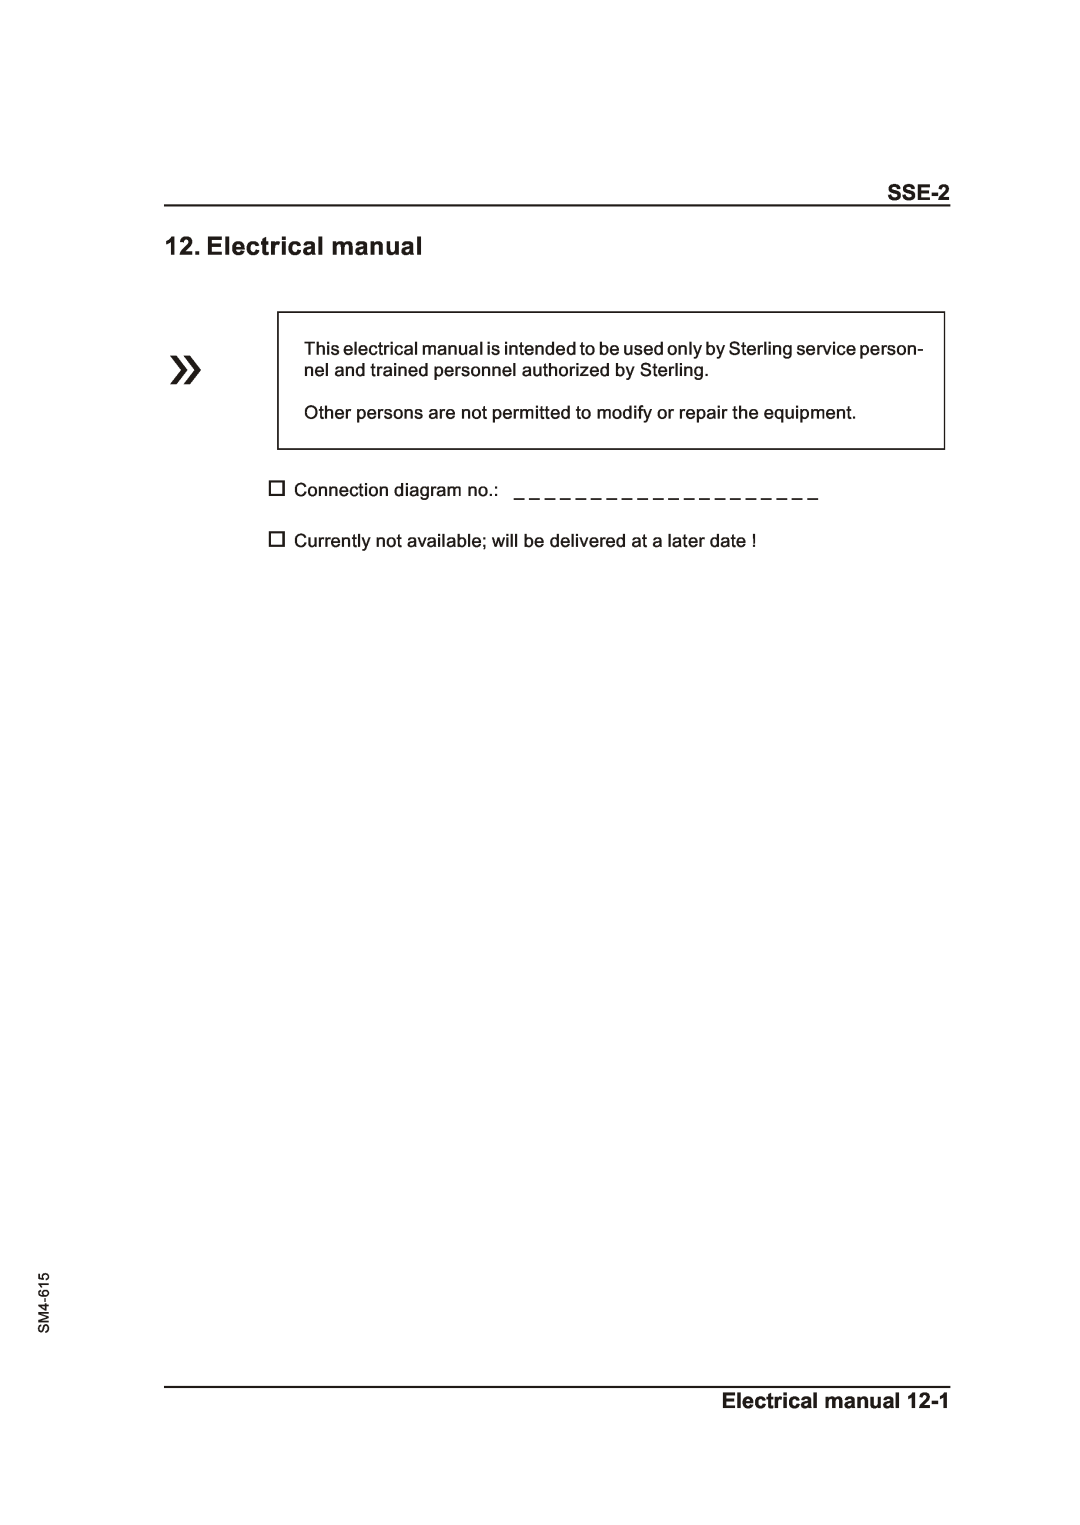 Sterling SSE-2 operating instructions Electrical manual 